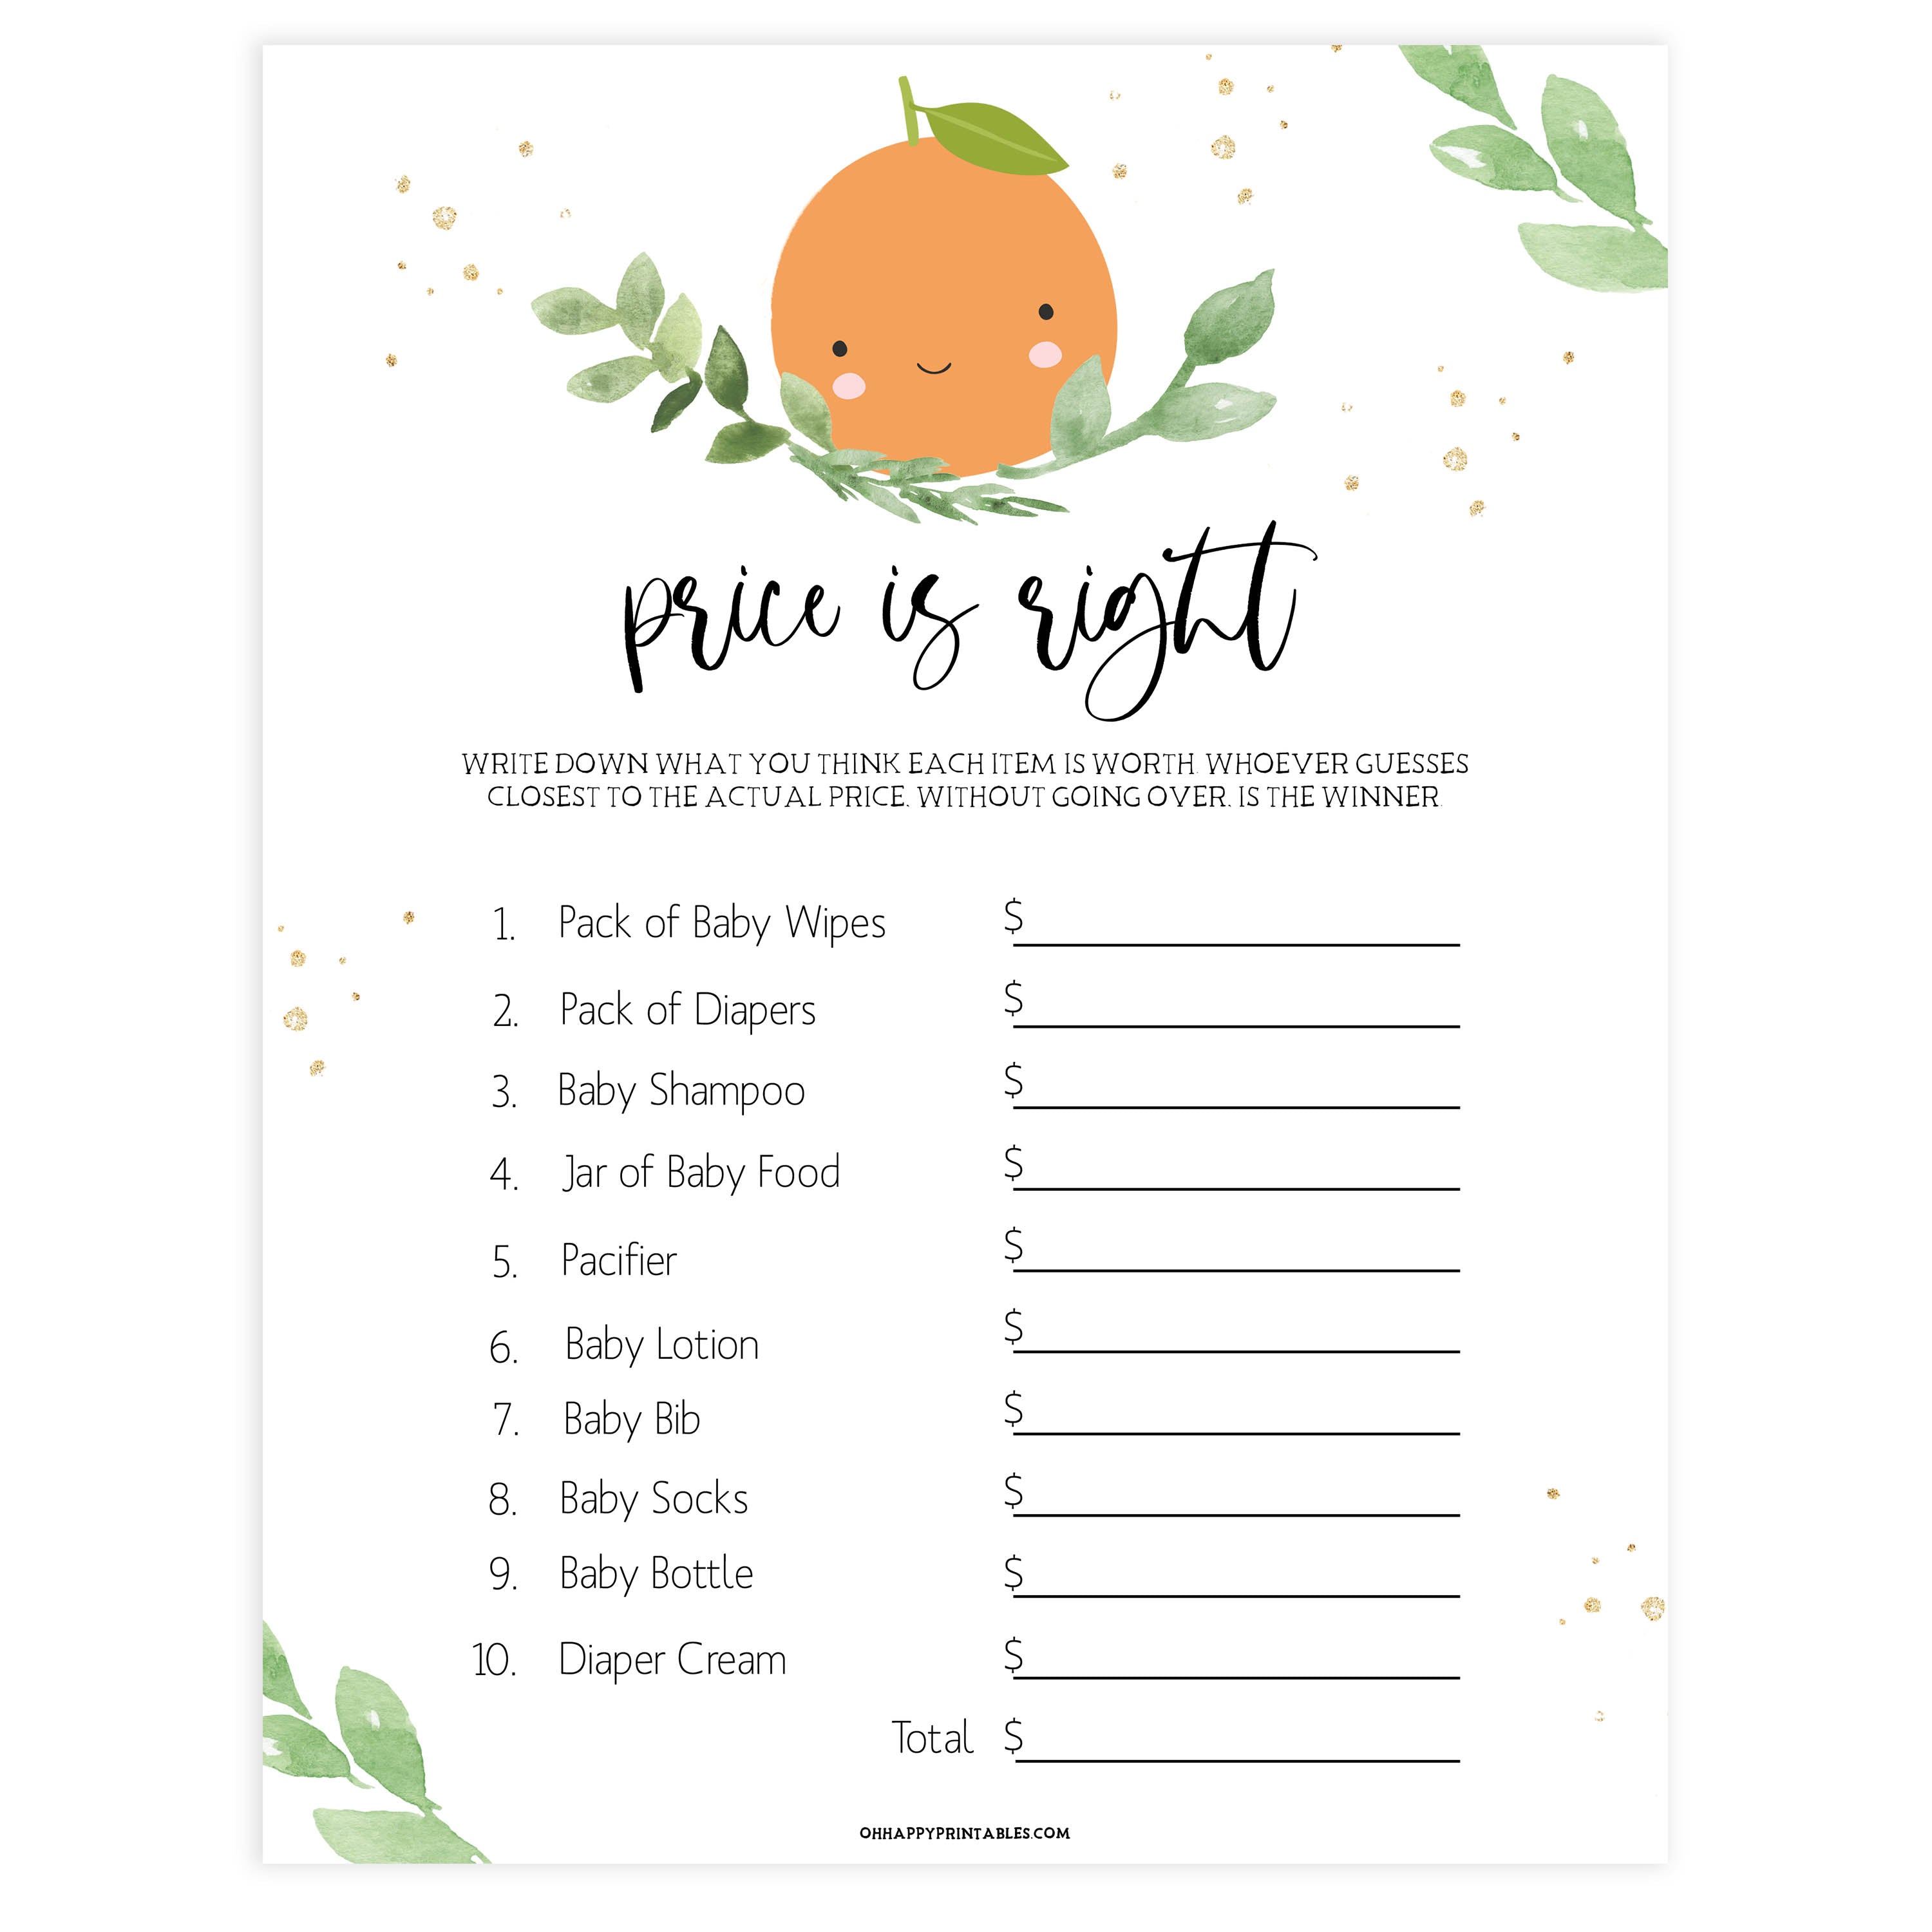 price is right baby shower game, Printable baby shower games, little cutie baby games, baby shower games, fun baby shower ideas, top baby shower ideas, little cutie baby shower, baby shower games, fun little cutie baby shower ideas